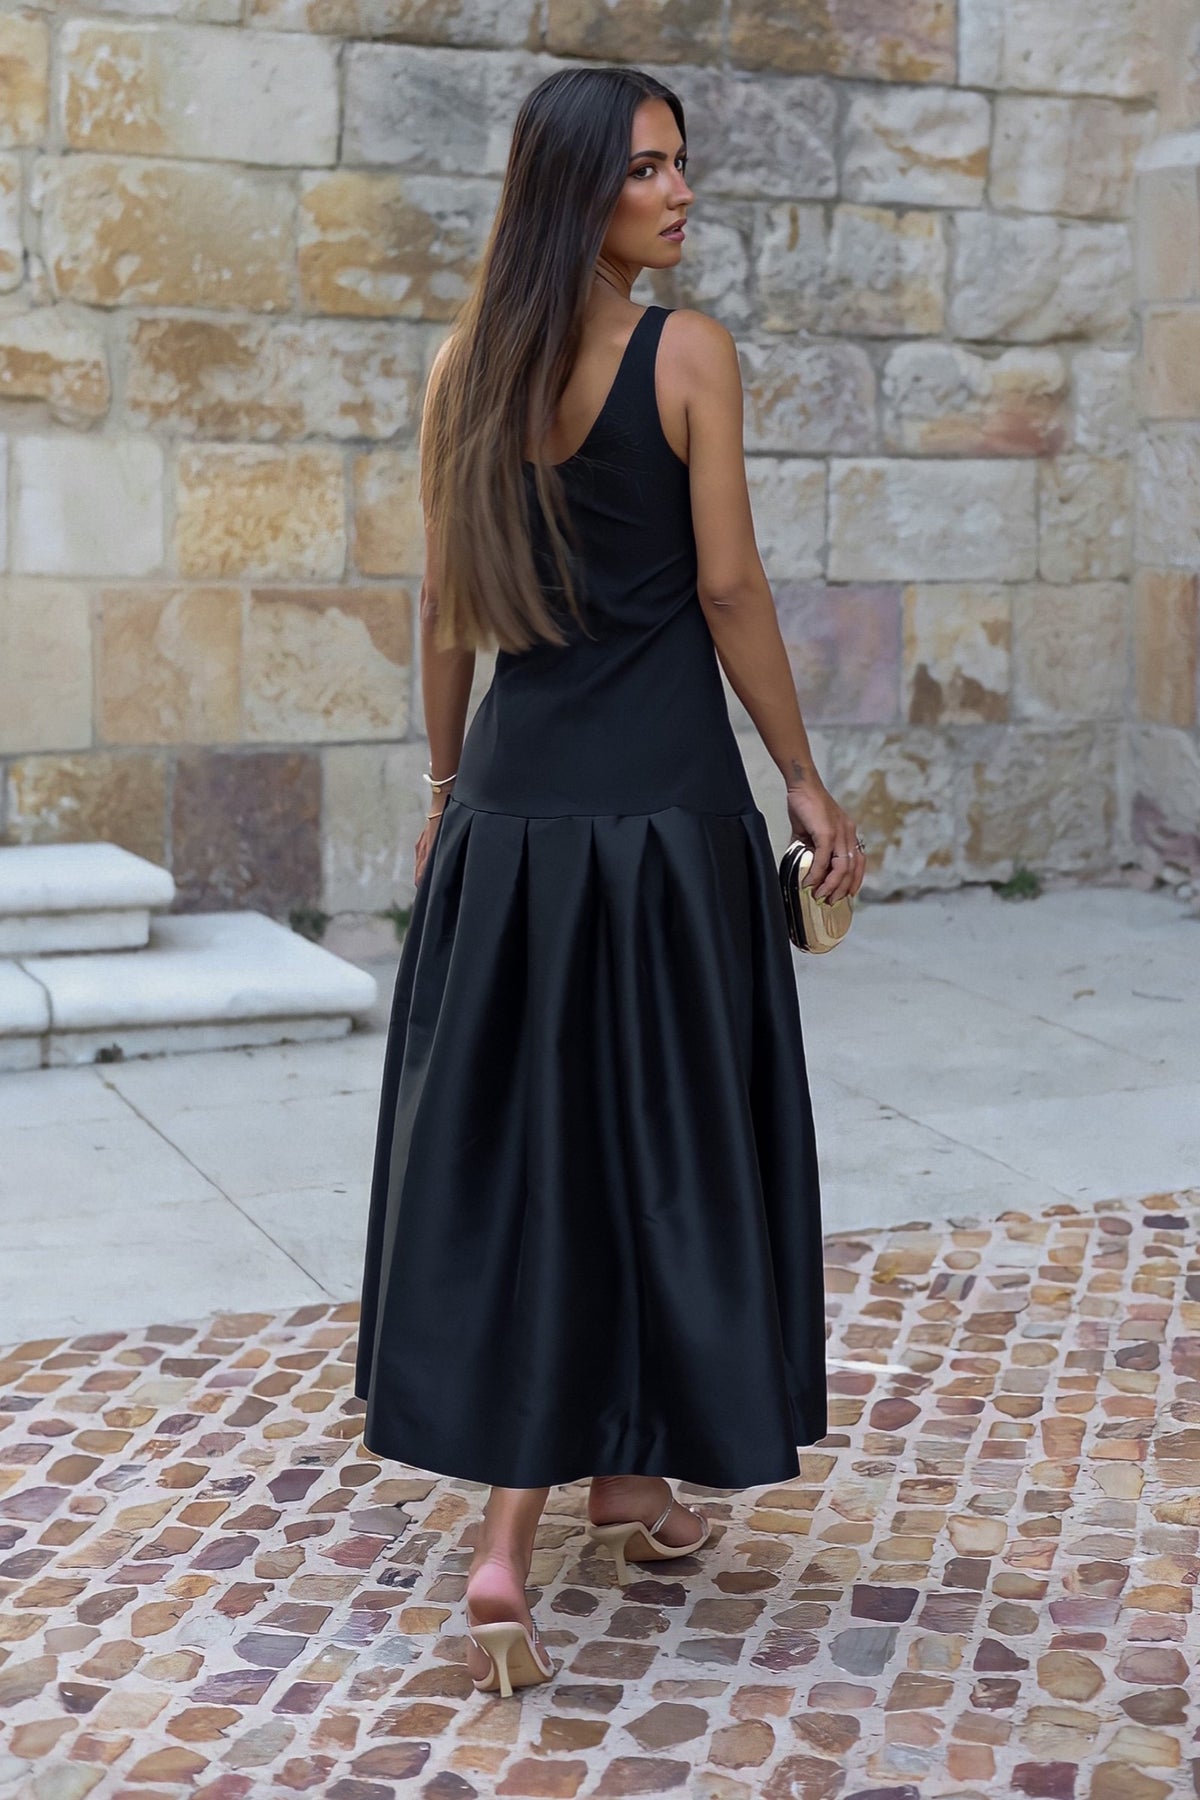 BLACK DRESS WITH PLEATS ON THE SKIRT